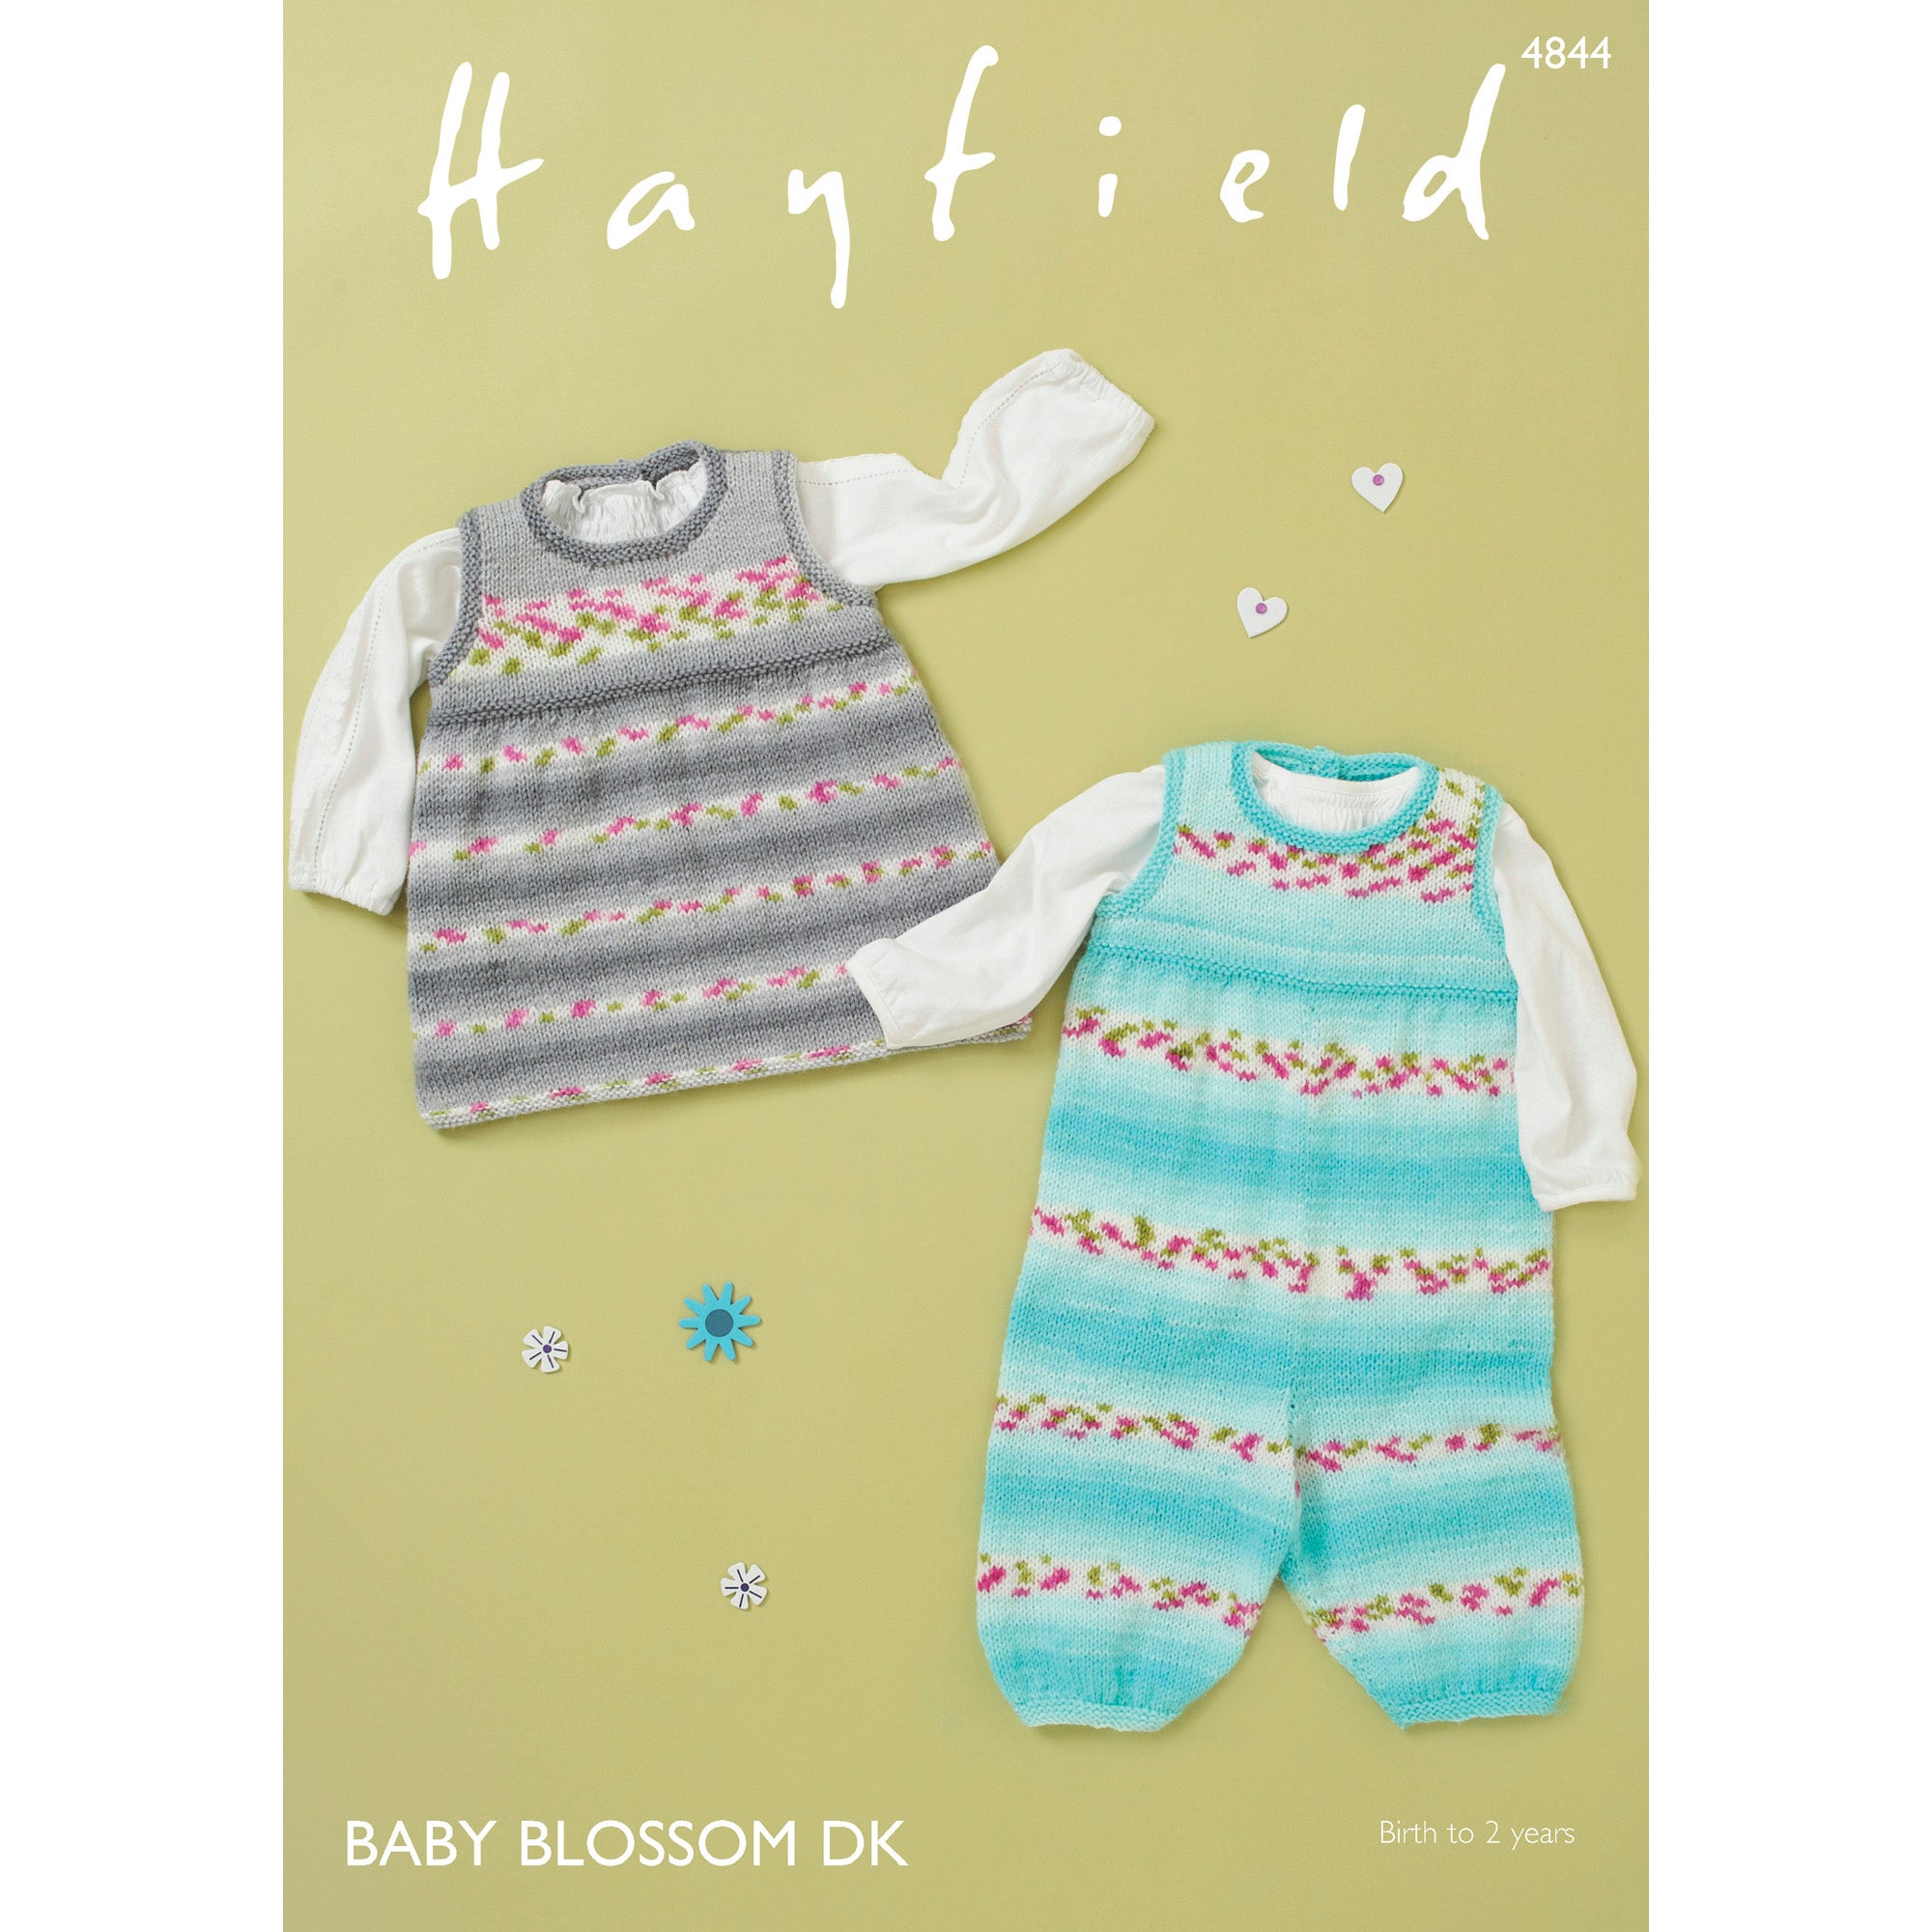 Hayfield 4844 Hayfield Blossom DK Dungarees and Pinafore Leaflet